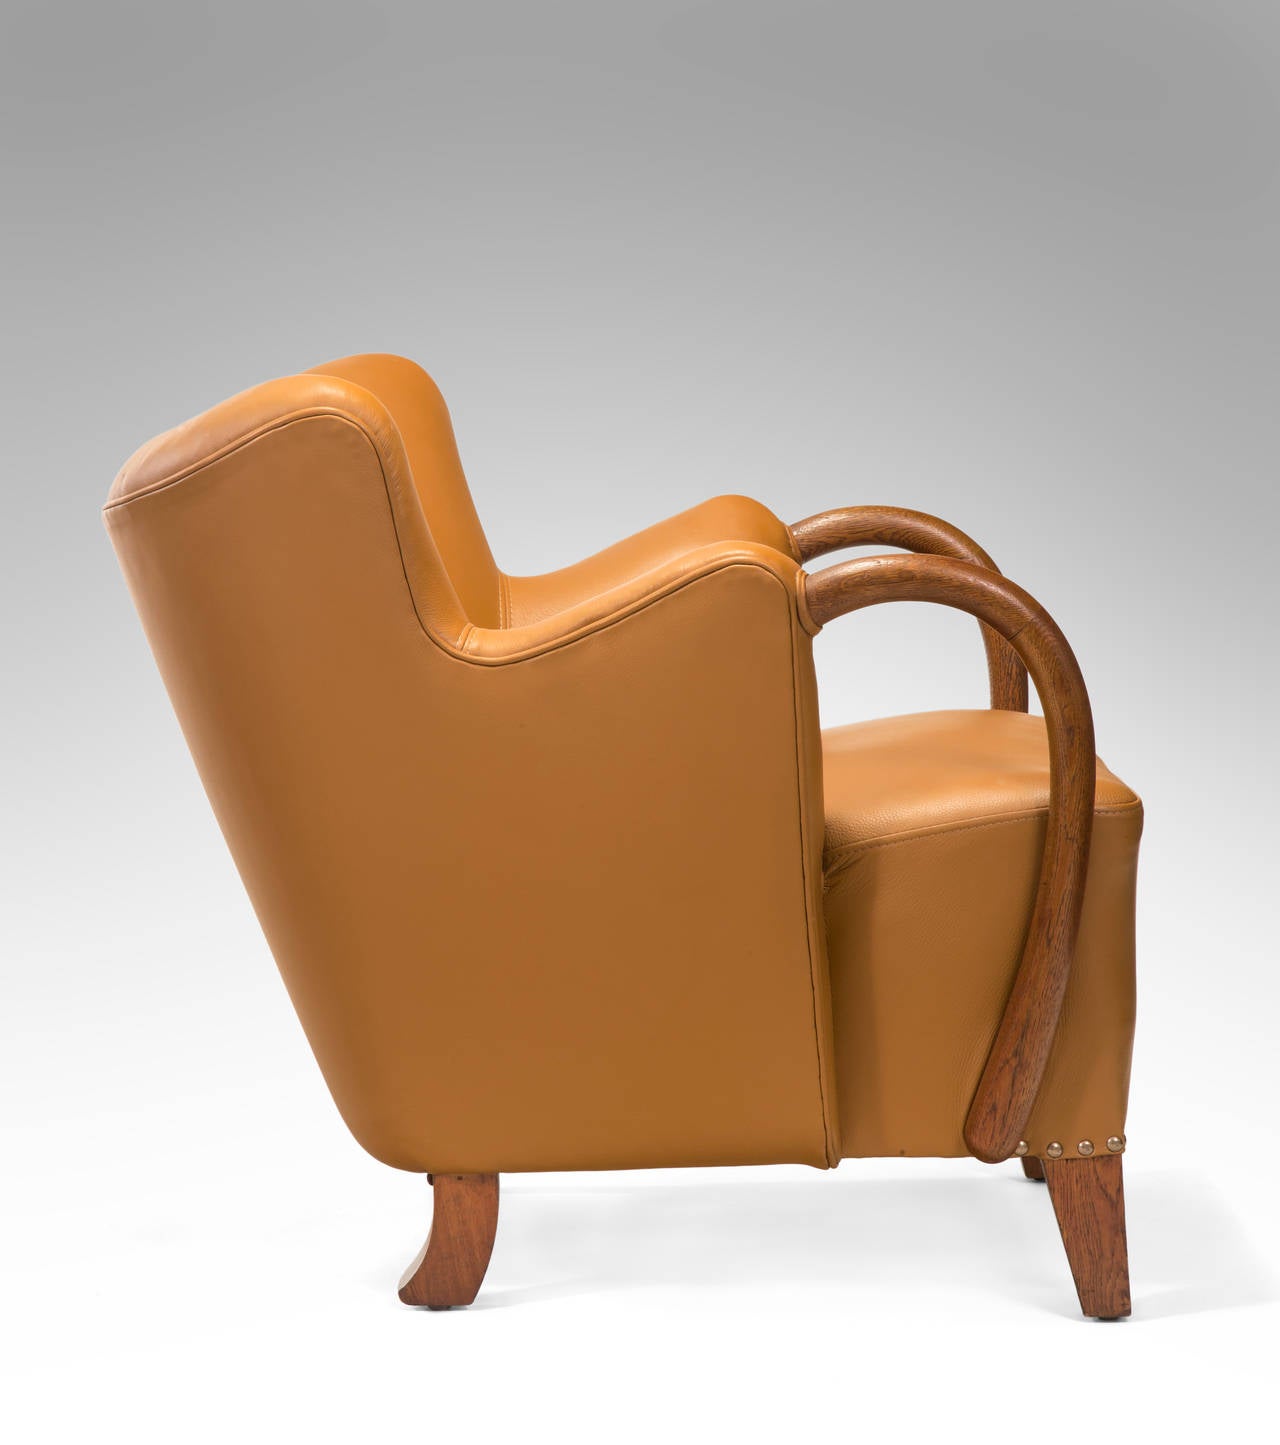 Curvaceous, exuberant, and superbly made in limited production, this chair perfectly capture the essence of 1940s Danish design.  The curved backrest, issuing pronounced arching wooden armrests, above a rectangular seat, terminating in square front